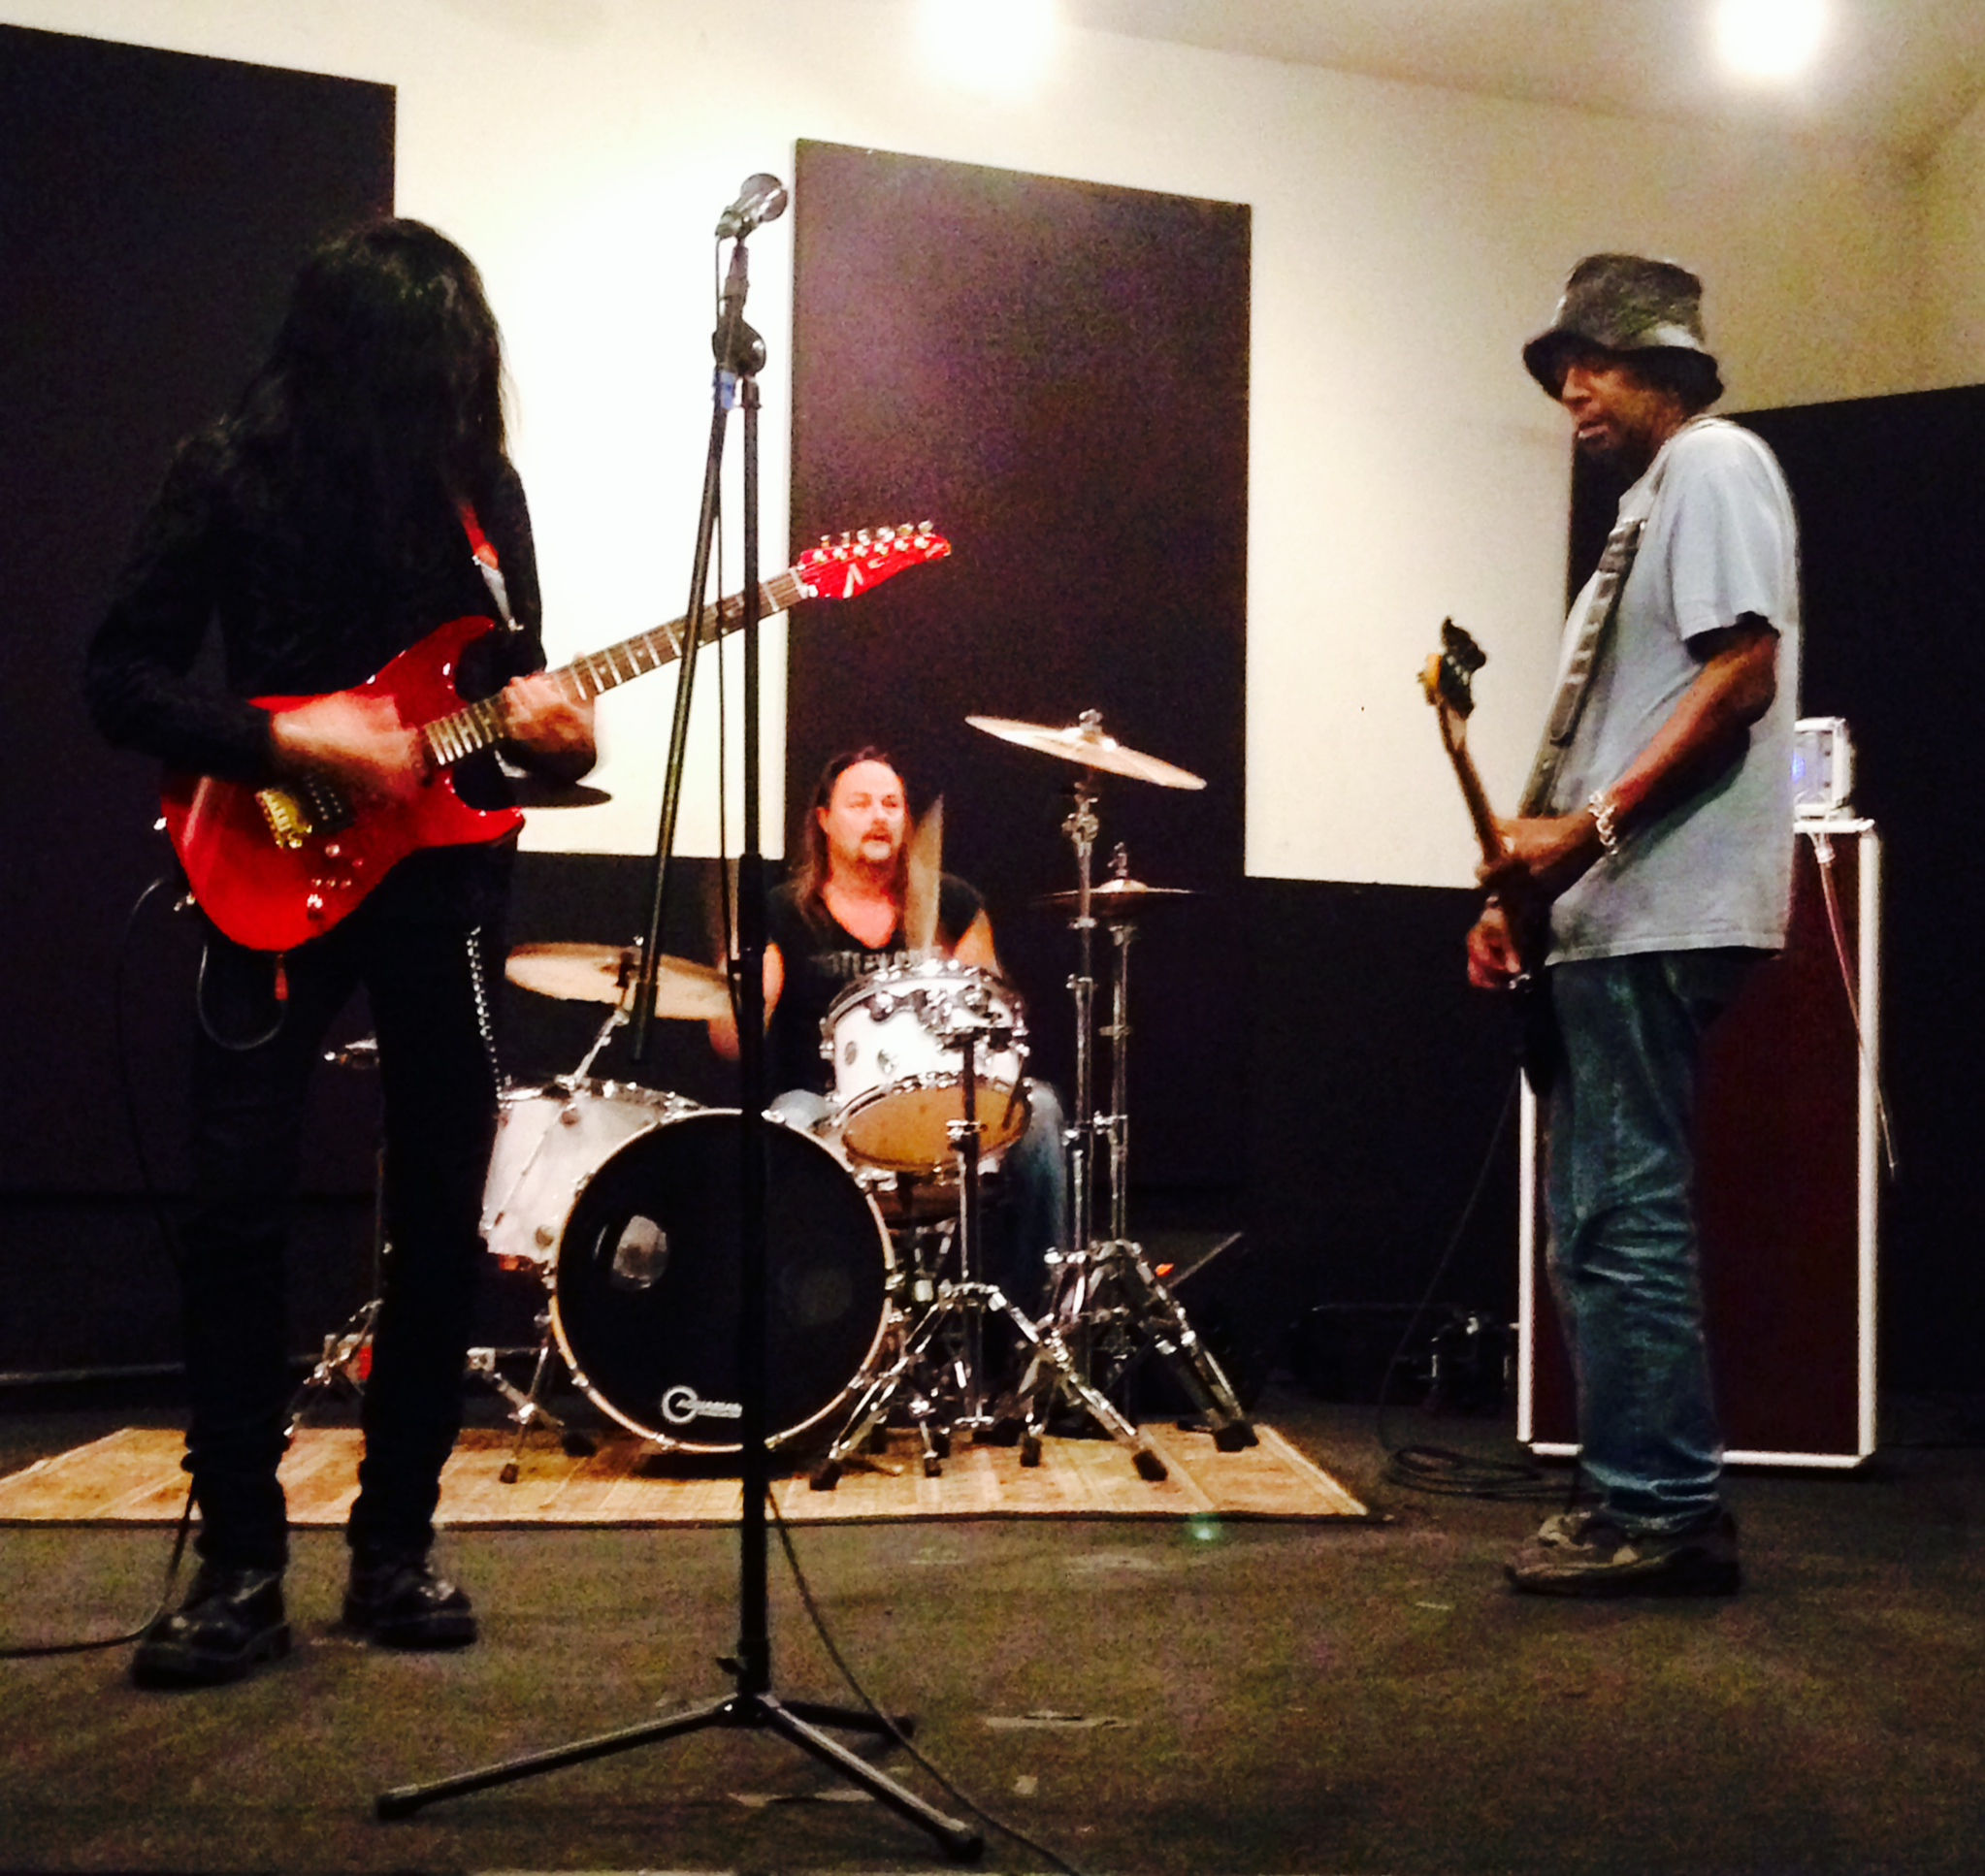 Mike Campese, Willie Basse and Bobby Richards, playing in North Hollywood, CA.